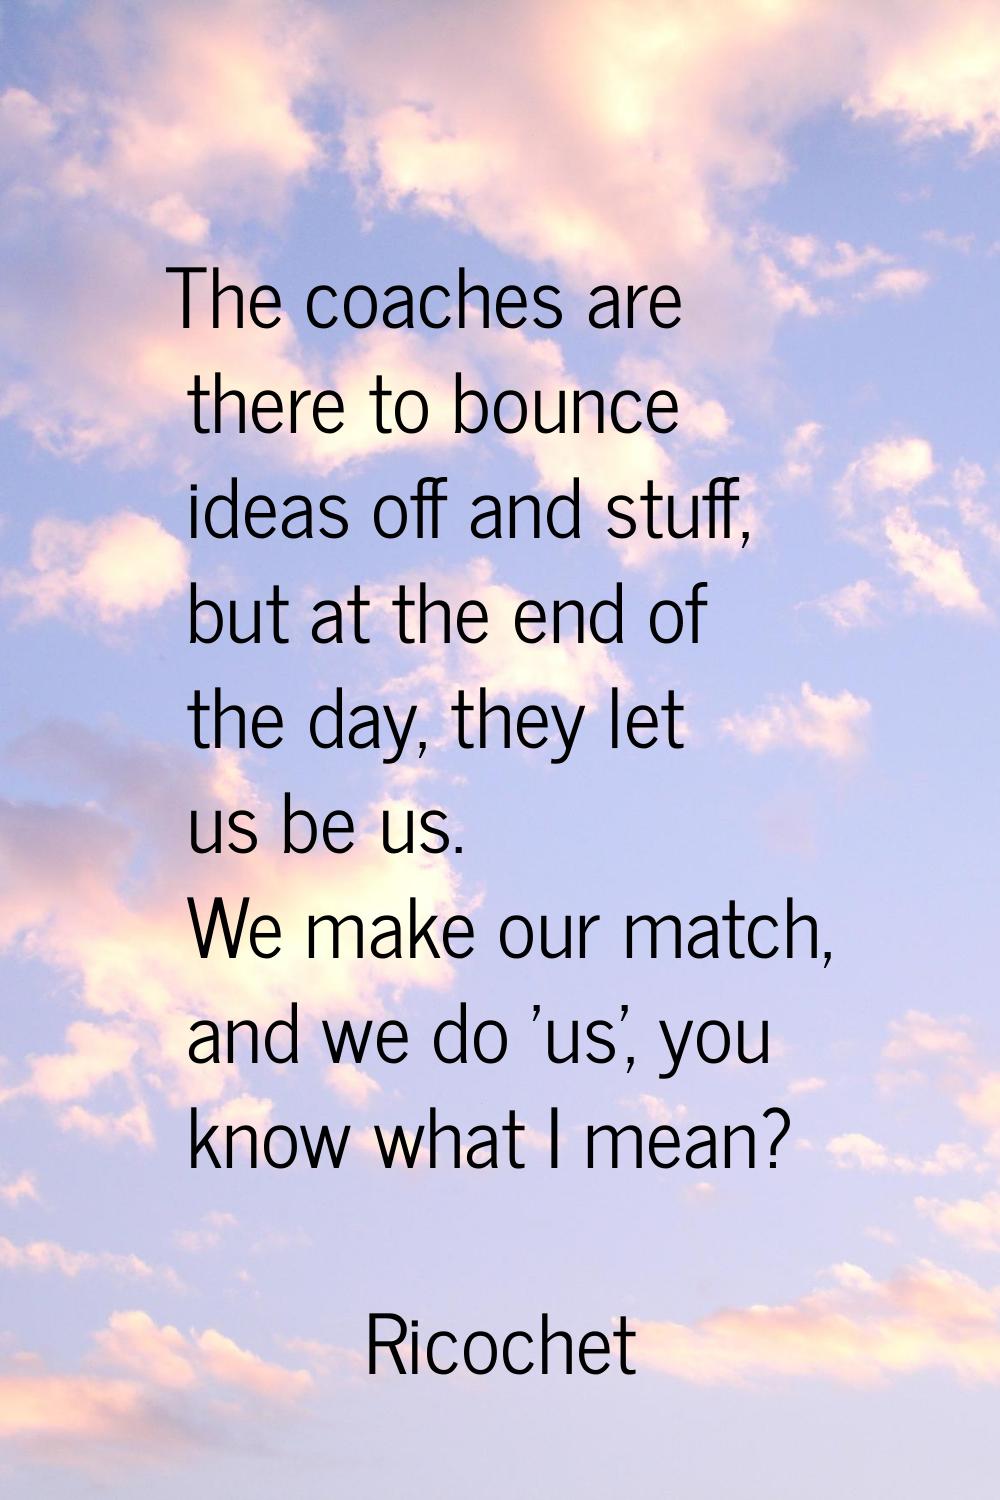 The coaches are there to bounce ideas off and stuff, but at the end of the day, they let us be us. 